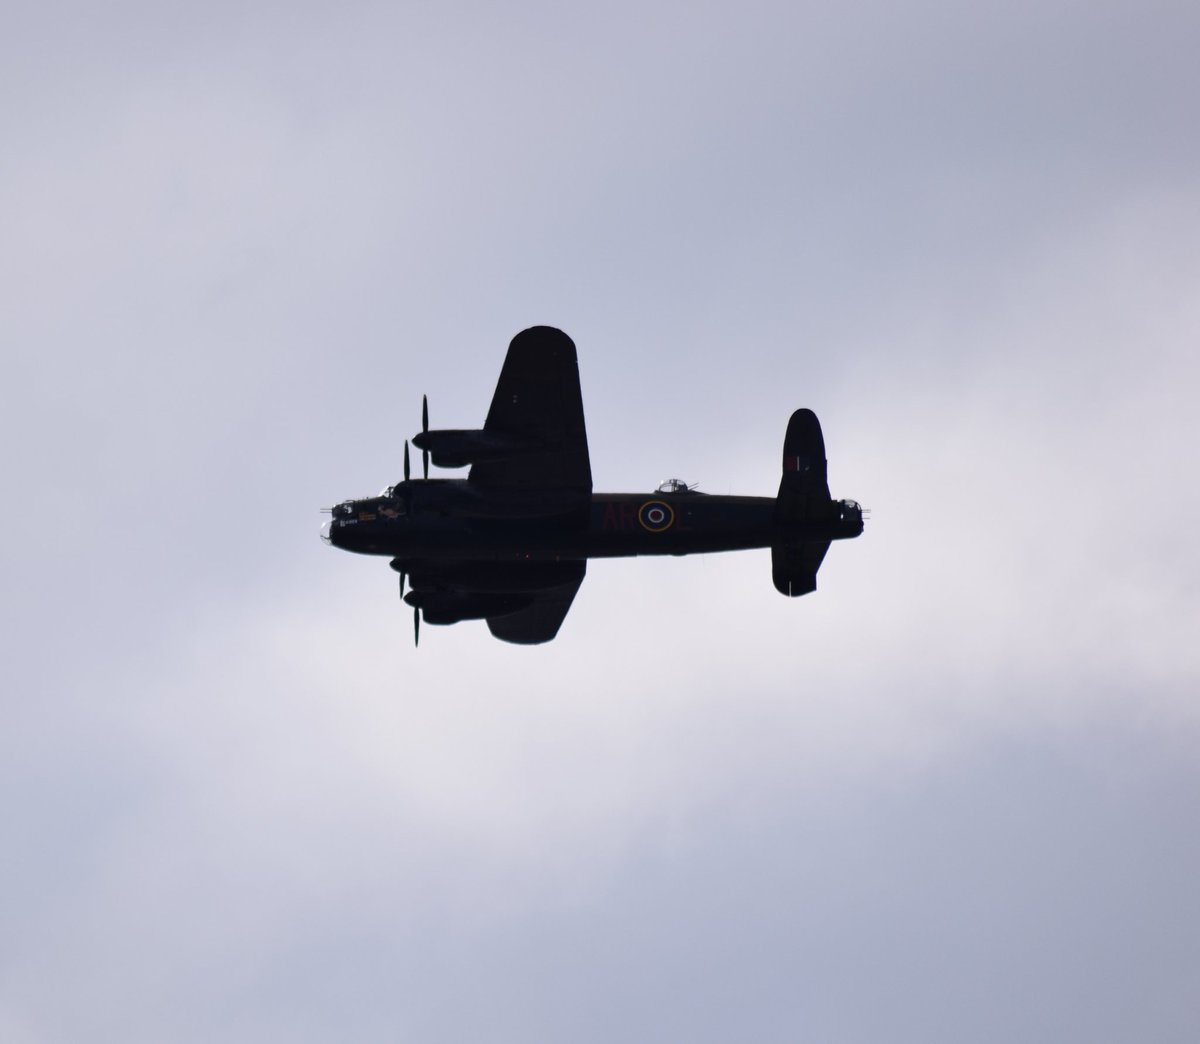 Great view today of the #lincolncathedral flypast @RAFBBMF @LincsLive @thelincolnite @looknorthBBC @LincsCathedral